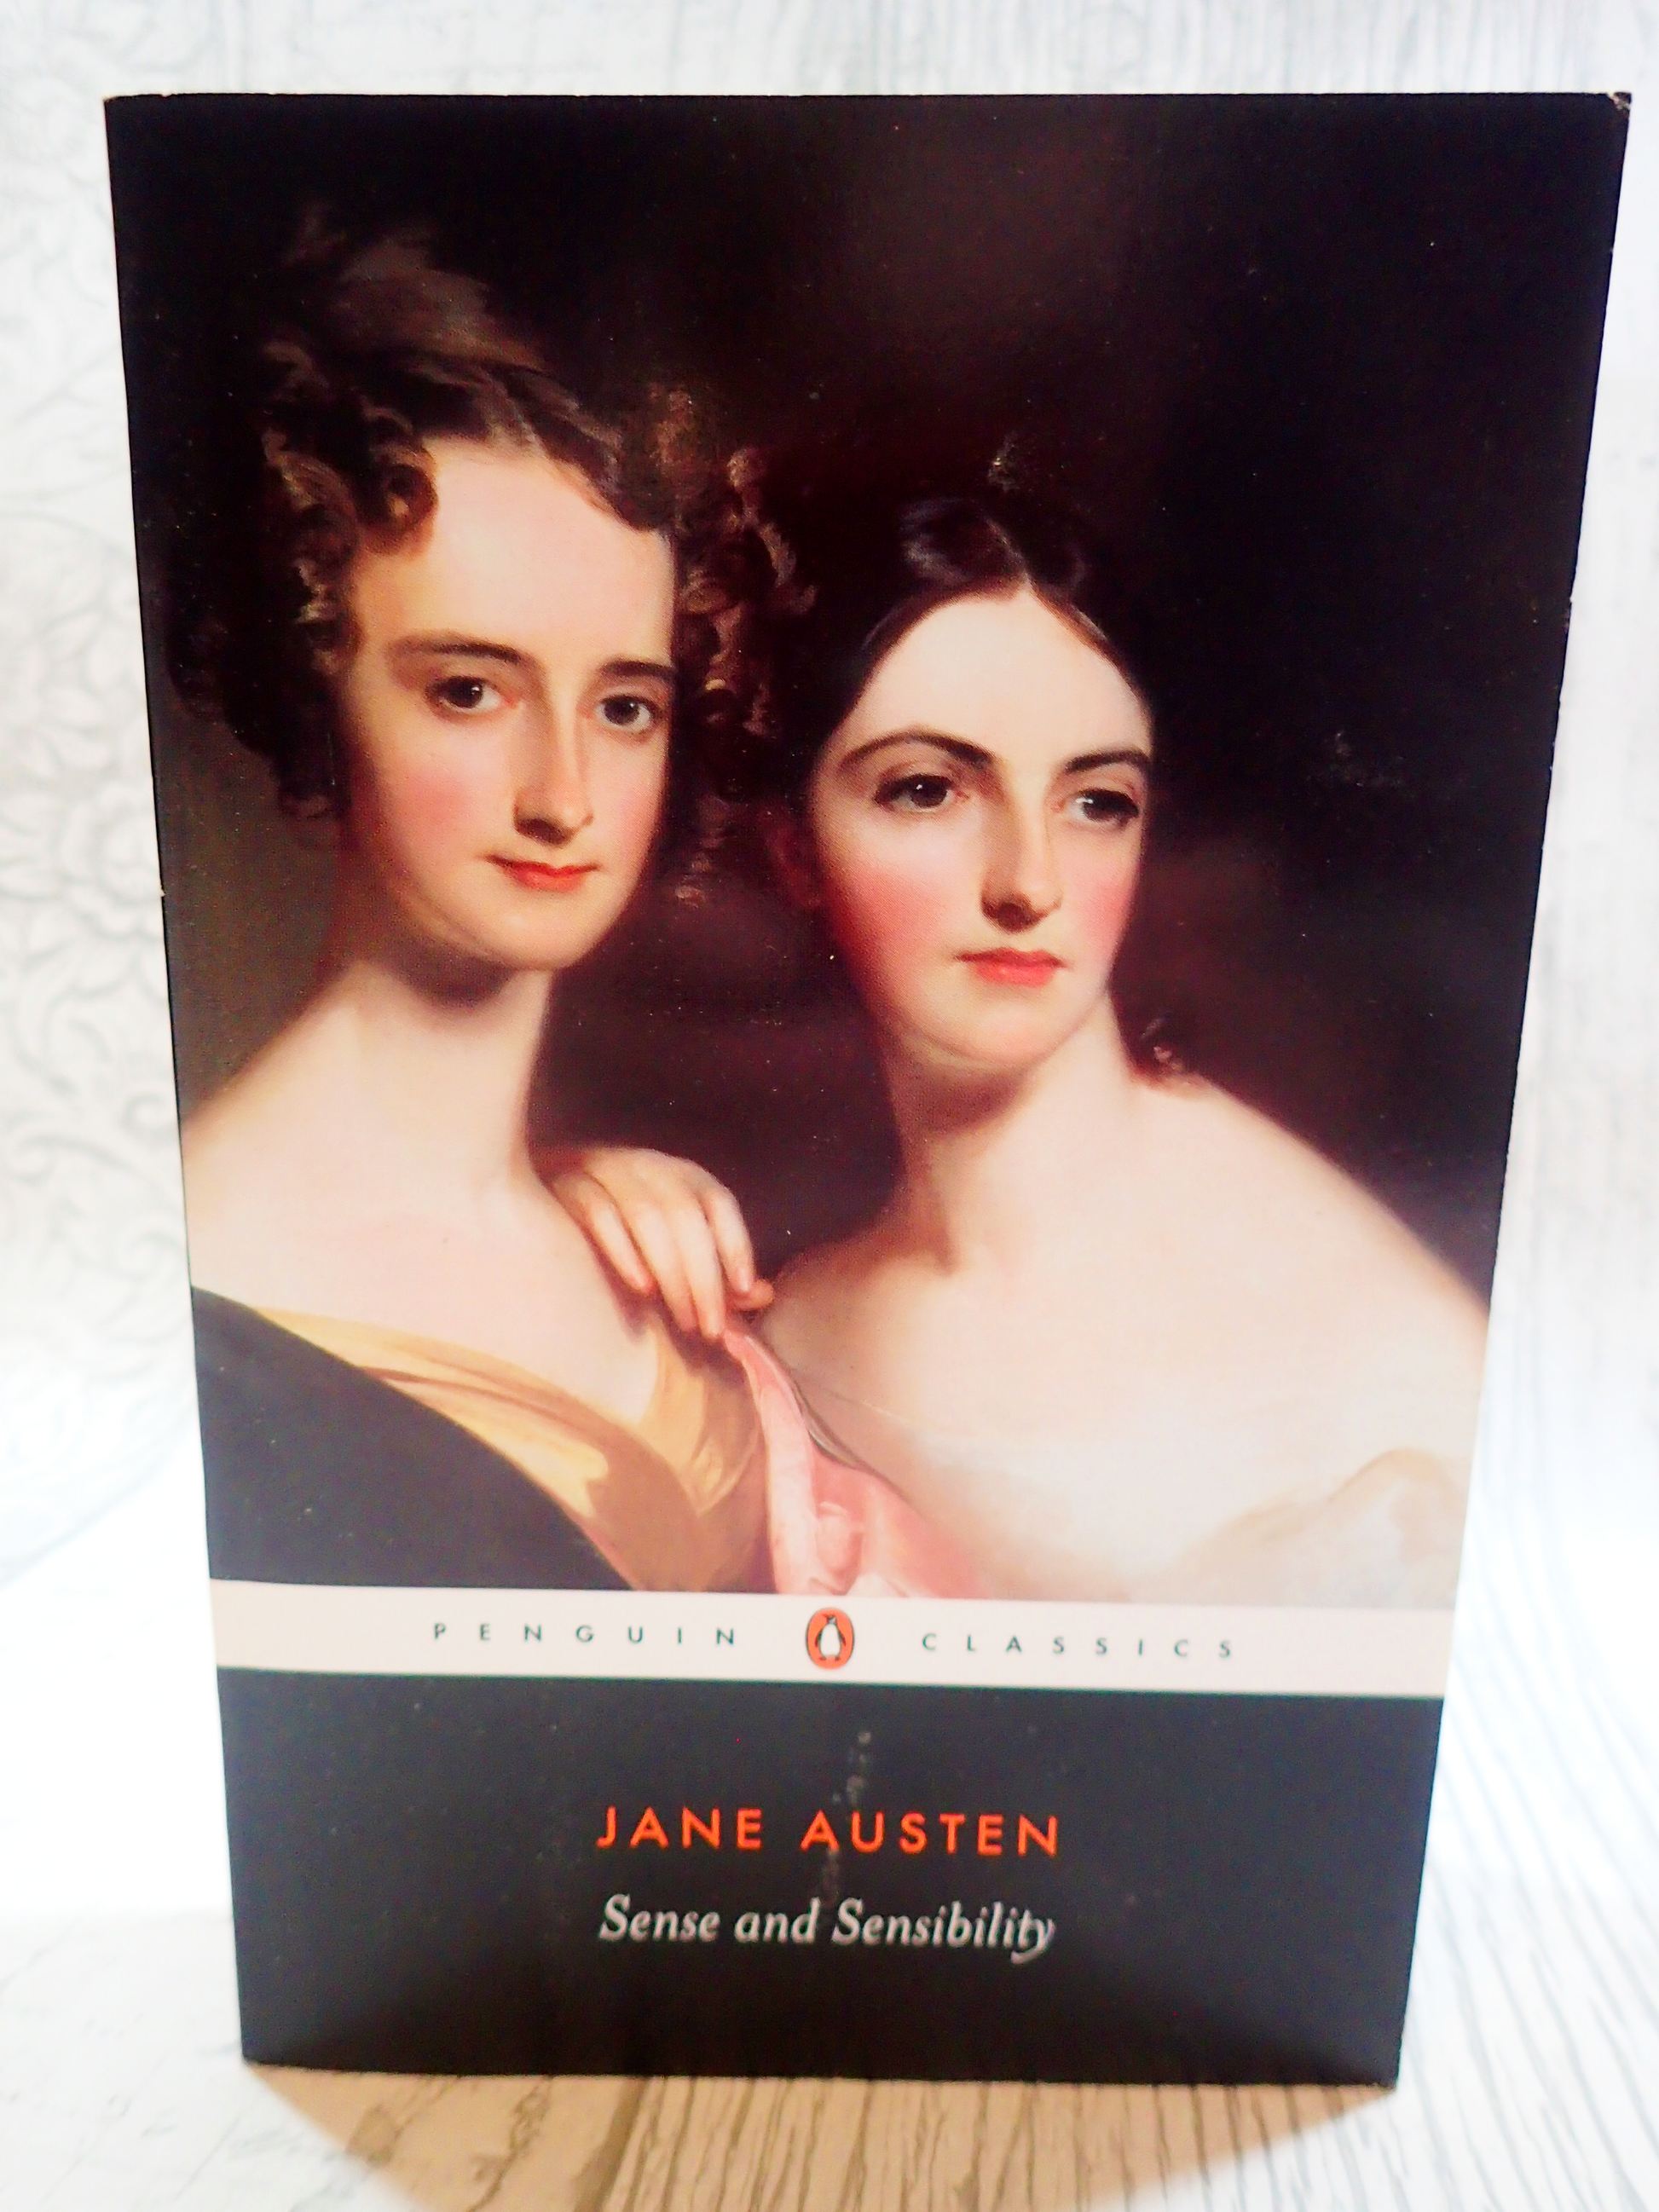 Front cover of paperback book Penguin Classics Sense and Sensibility Jane Austen showing portrait of two Regency ladies against a light background.